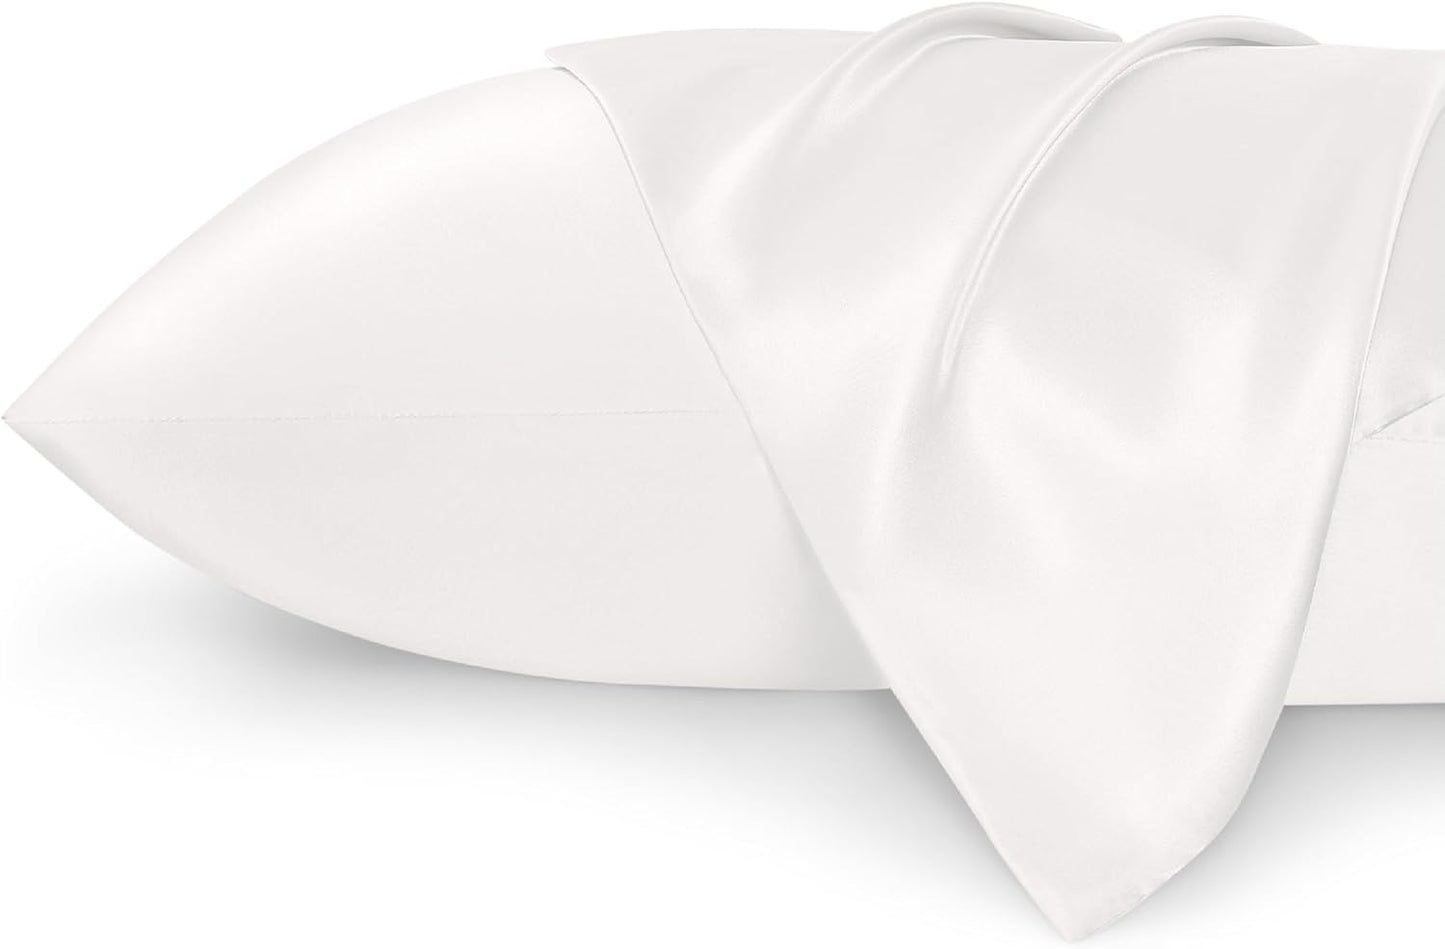 Bedsure Satin Pillowcase Standard Set of 2 - Ivory Silky Pillow Cases for Hair and Skin 20x26 Inches